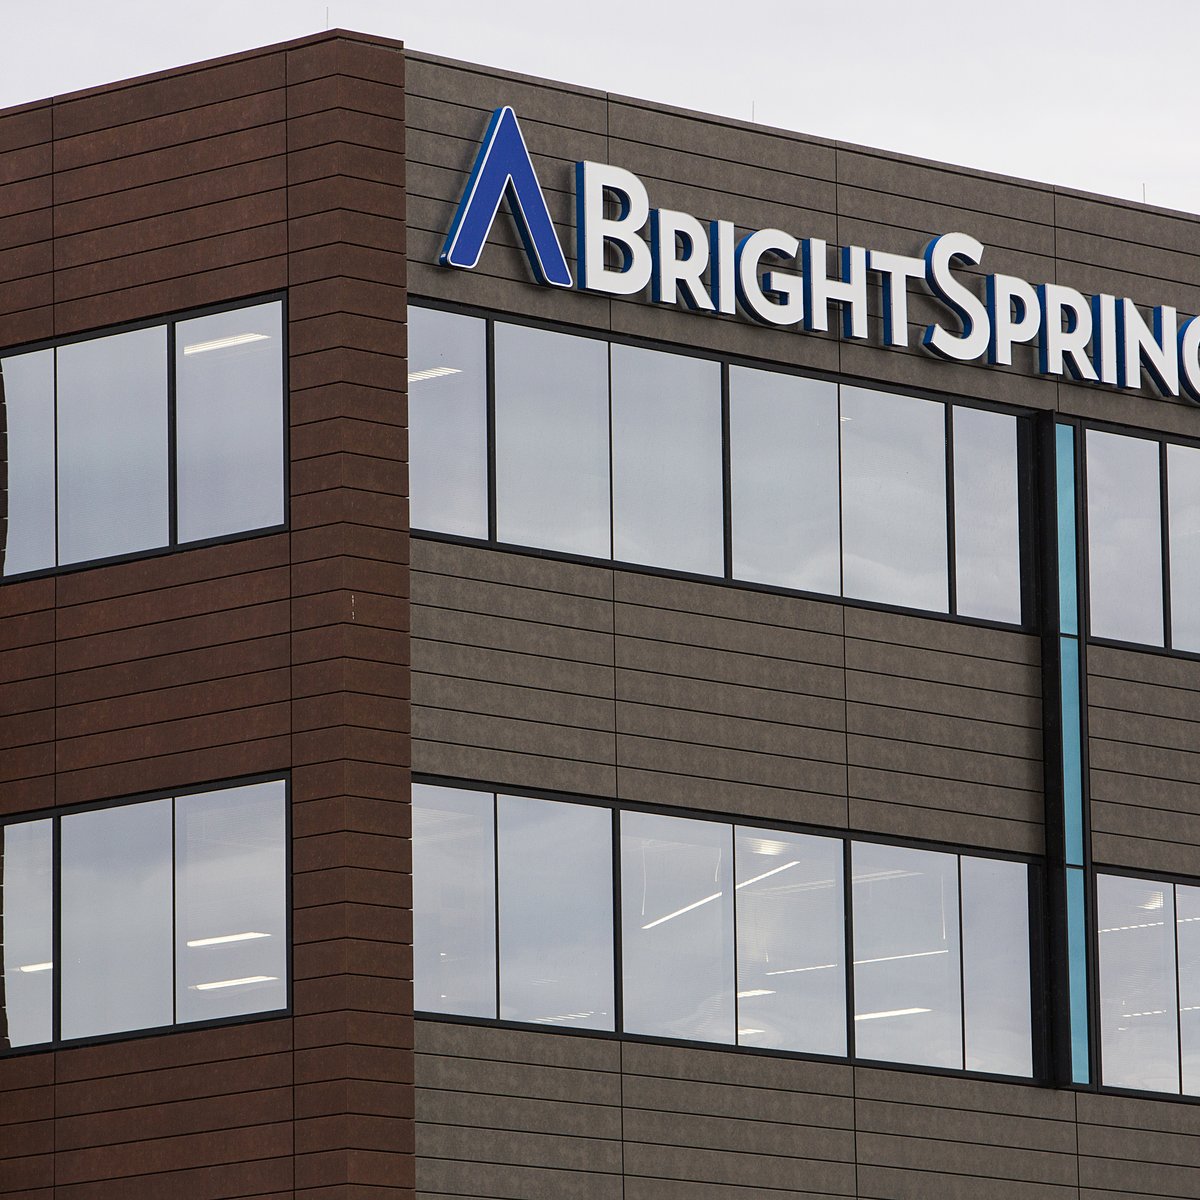 BrightSpring Health Services Announces 2022 Brighter Futures Scholarship  Applications Are Open - BrightSpring Health Services